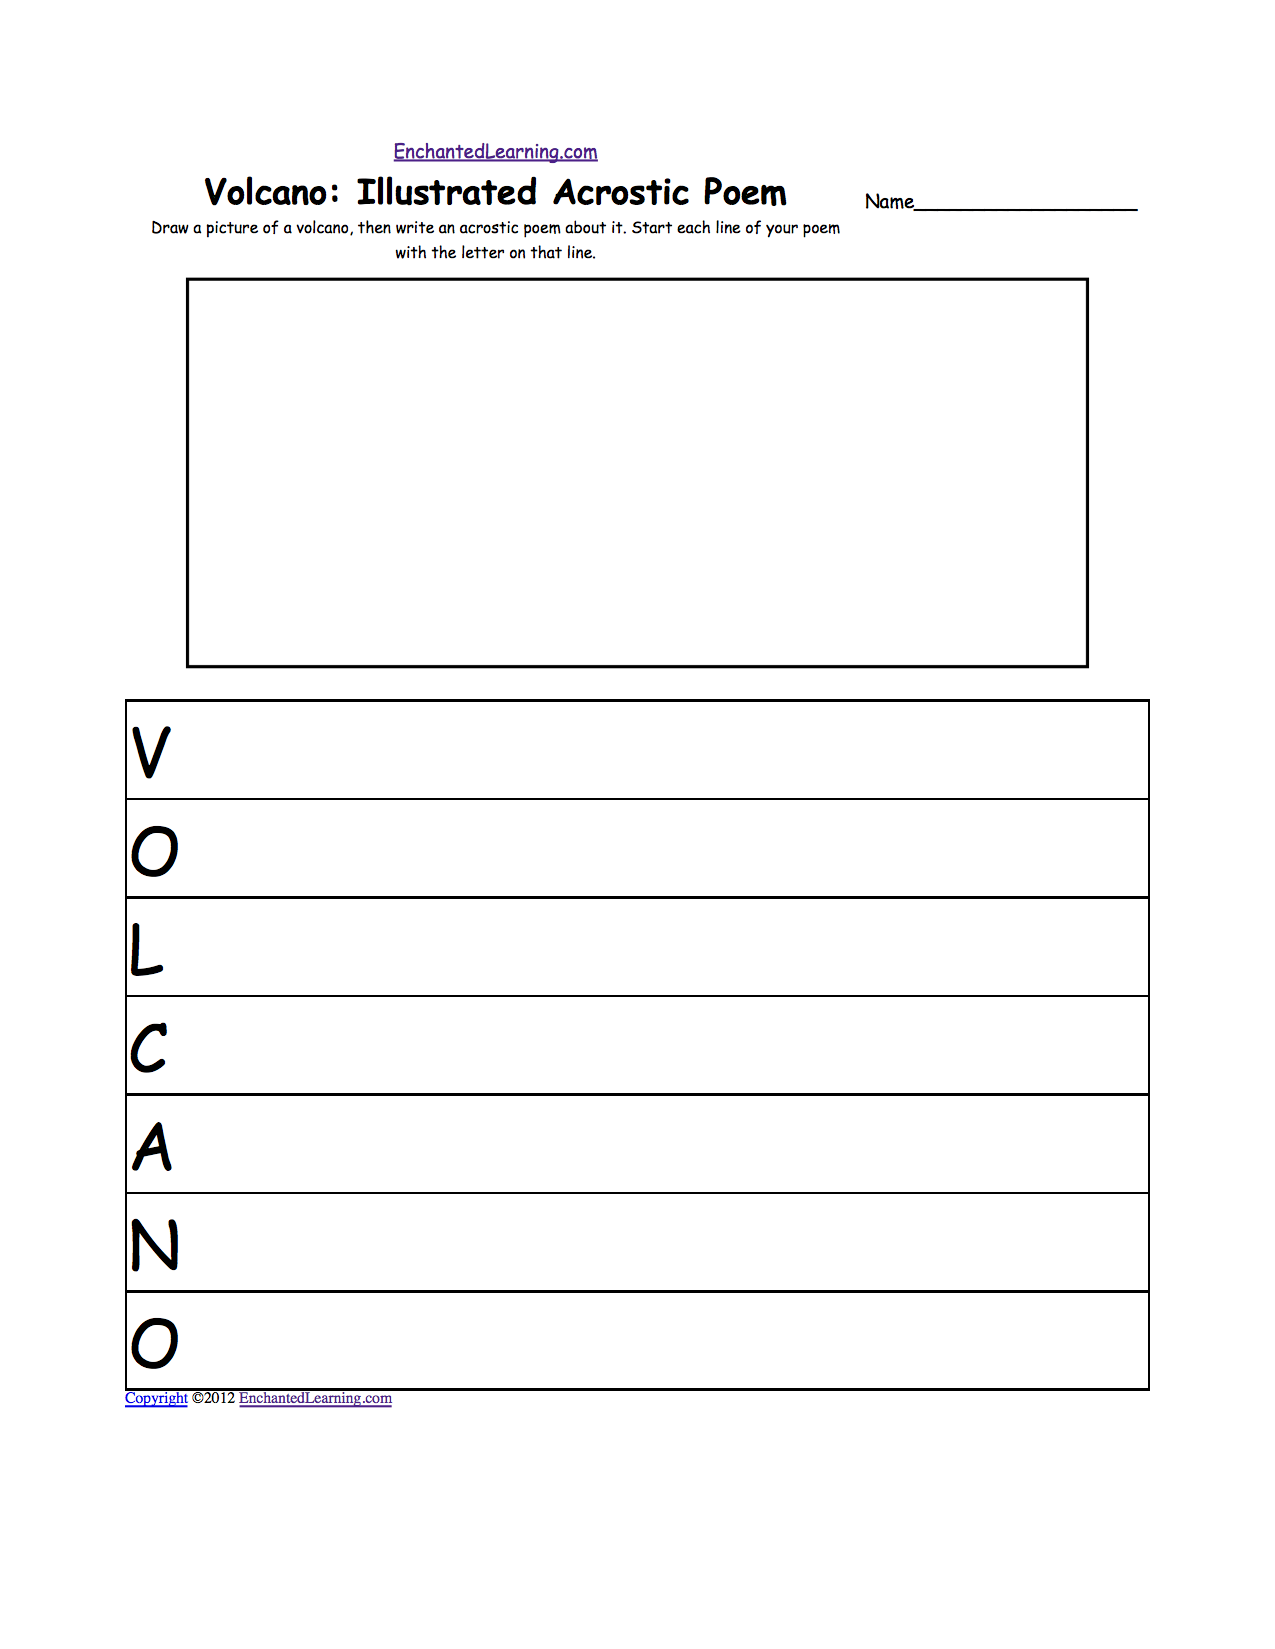 Easy Labeled Picture Of A Volcano Image